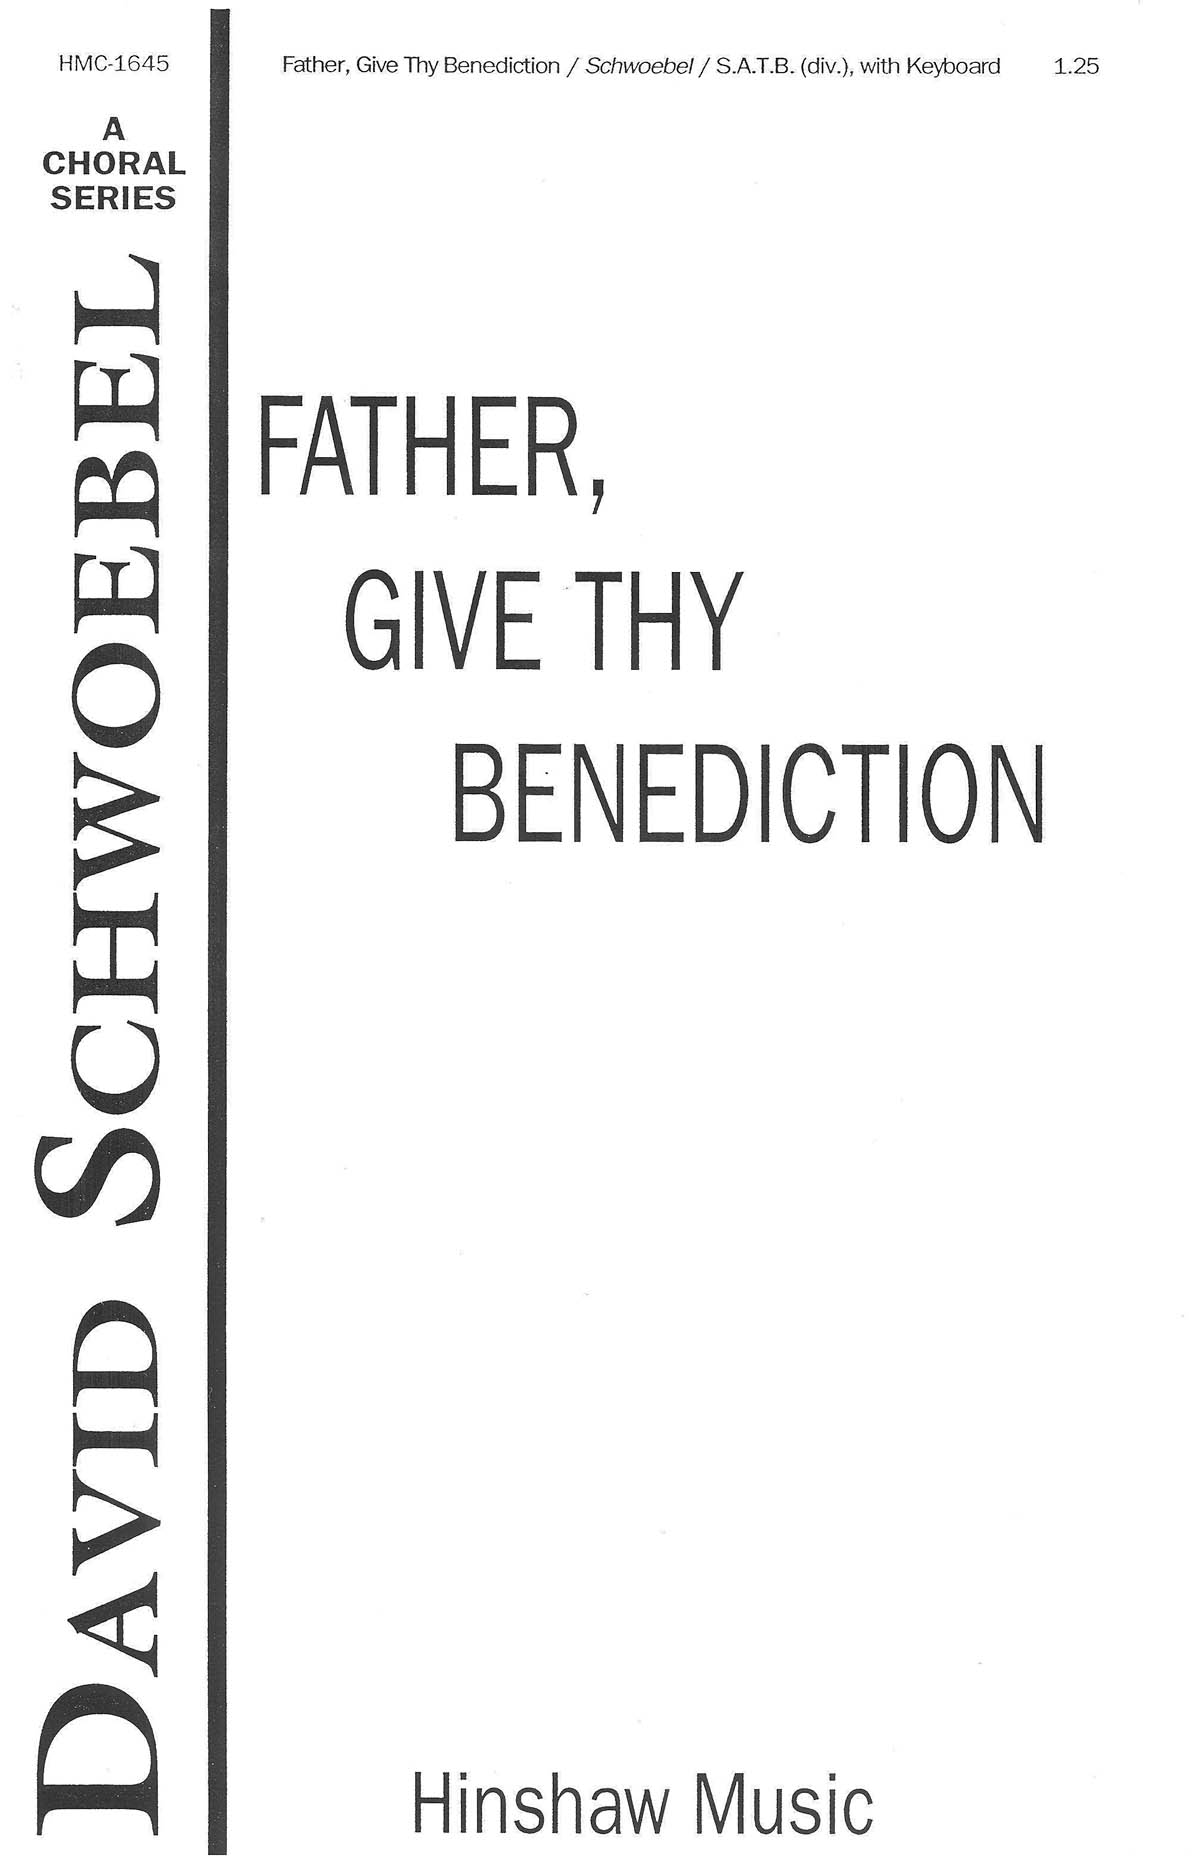 Father, Give Thy Benediction